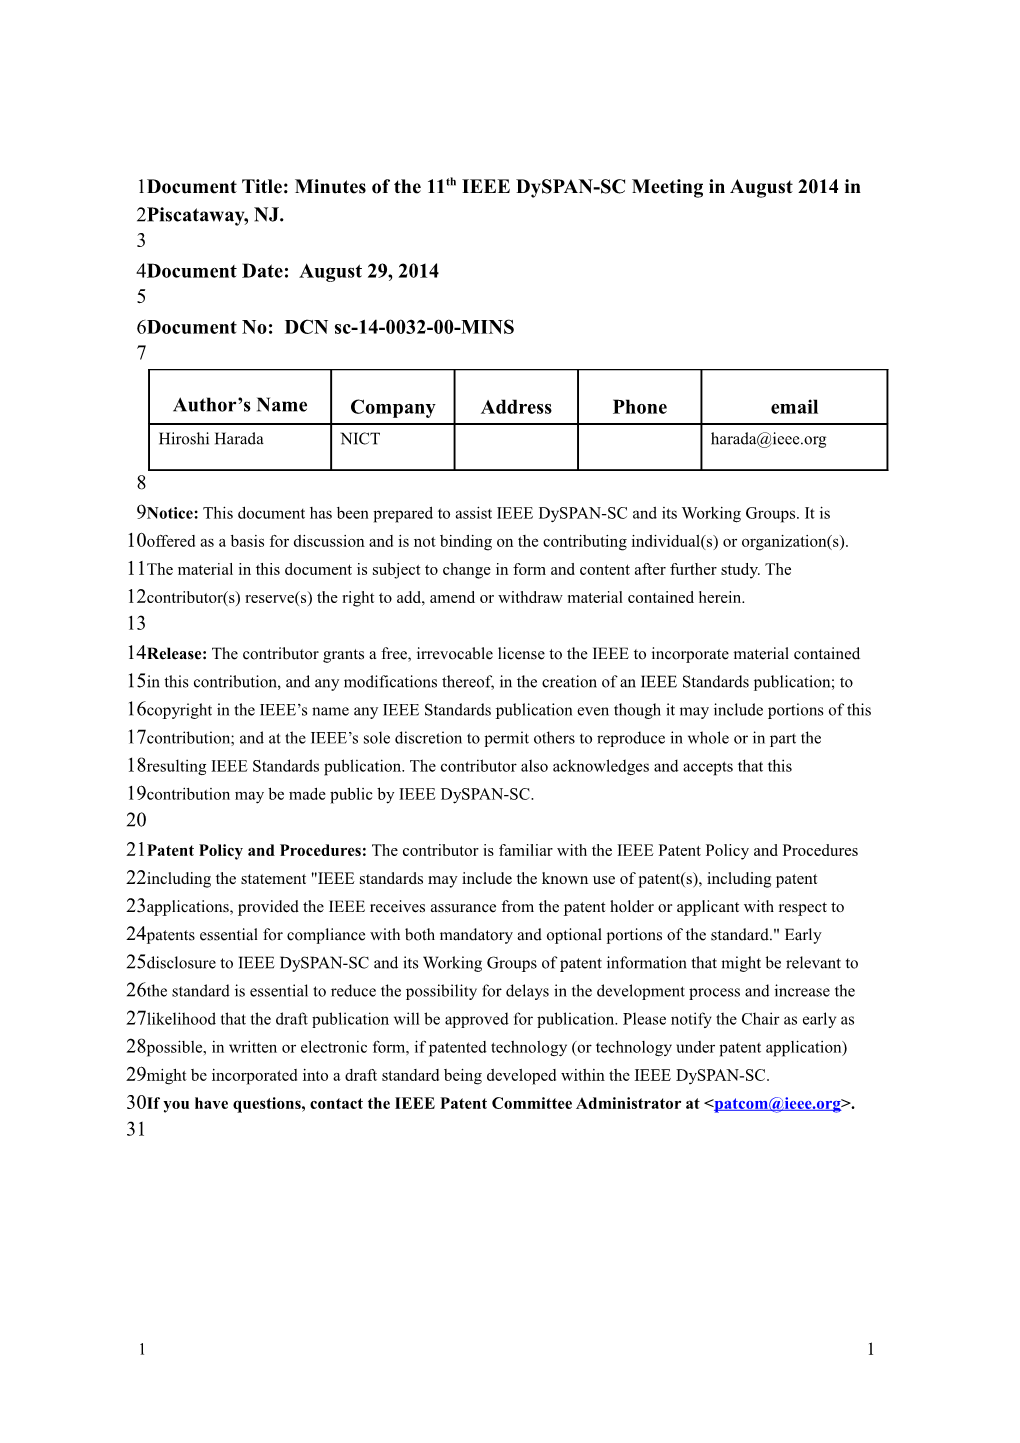 Document Title: Minutes of the 11Thieee Dyspan-Scmeeting in August 2014 in Piscataway, NJ